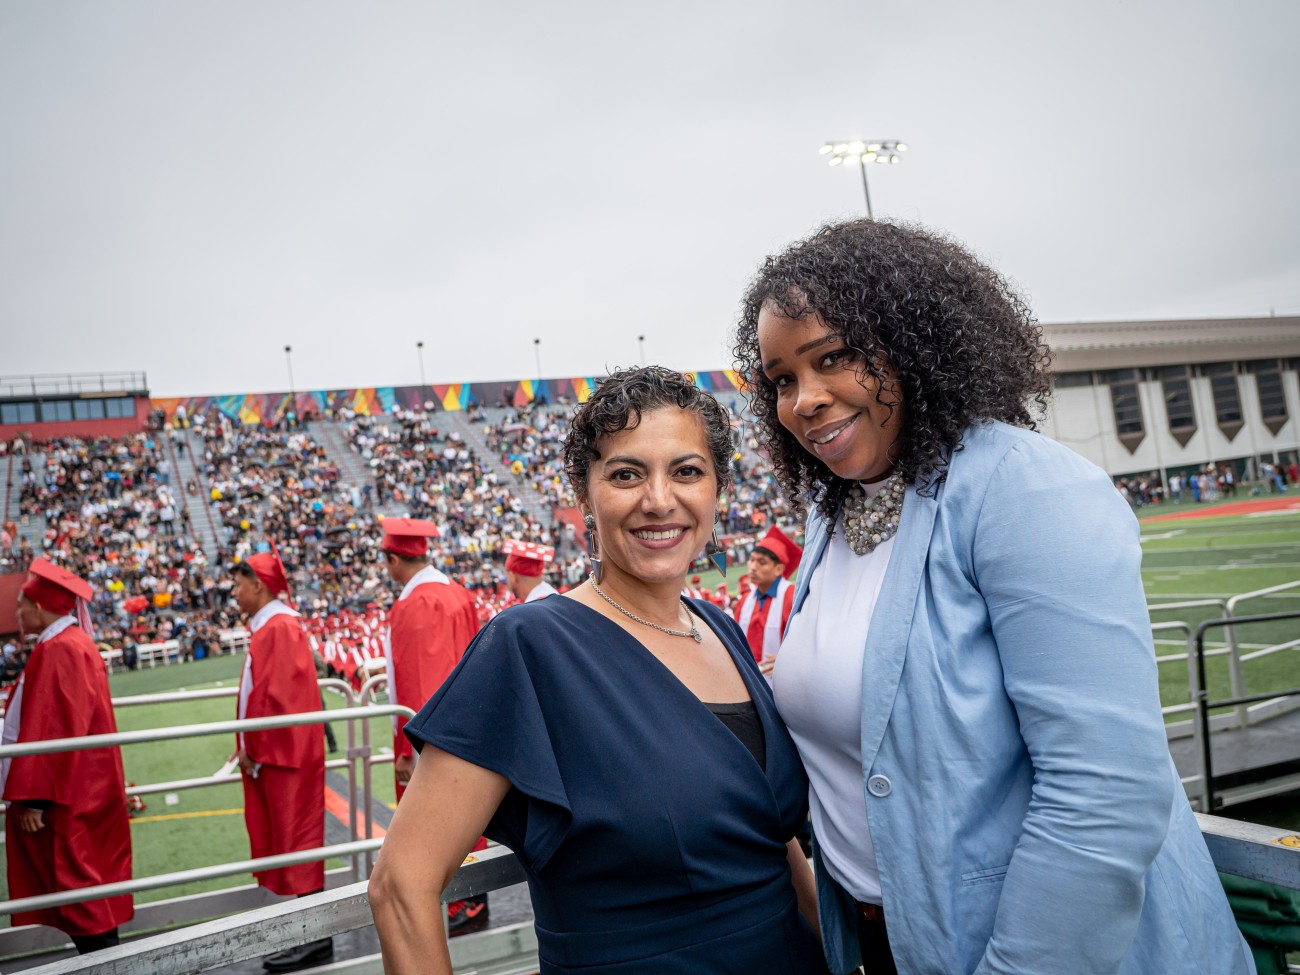 Two women pose together on a football field, a commencement ceremony taking place in the background.